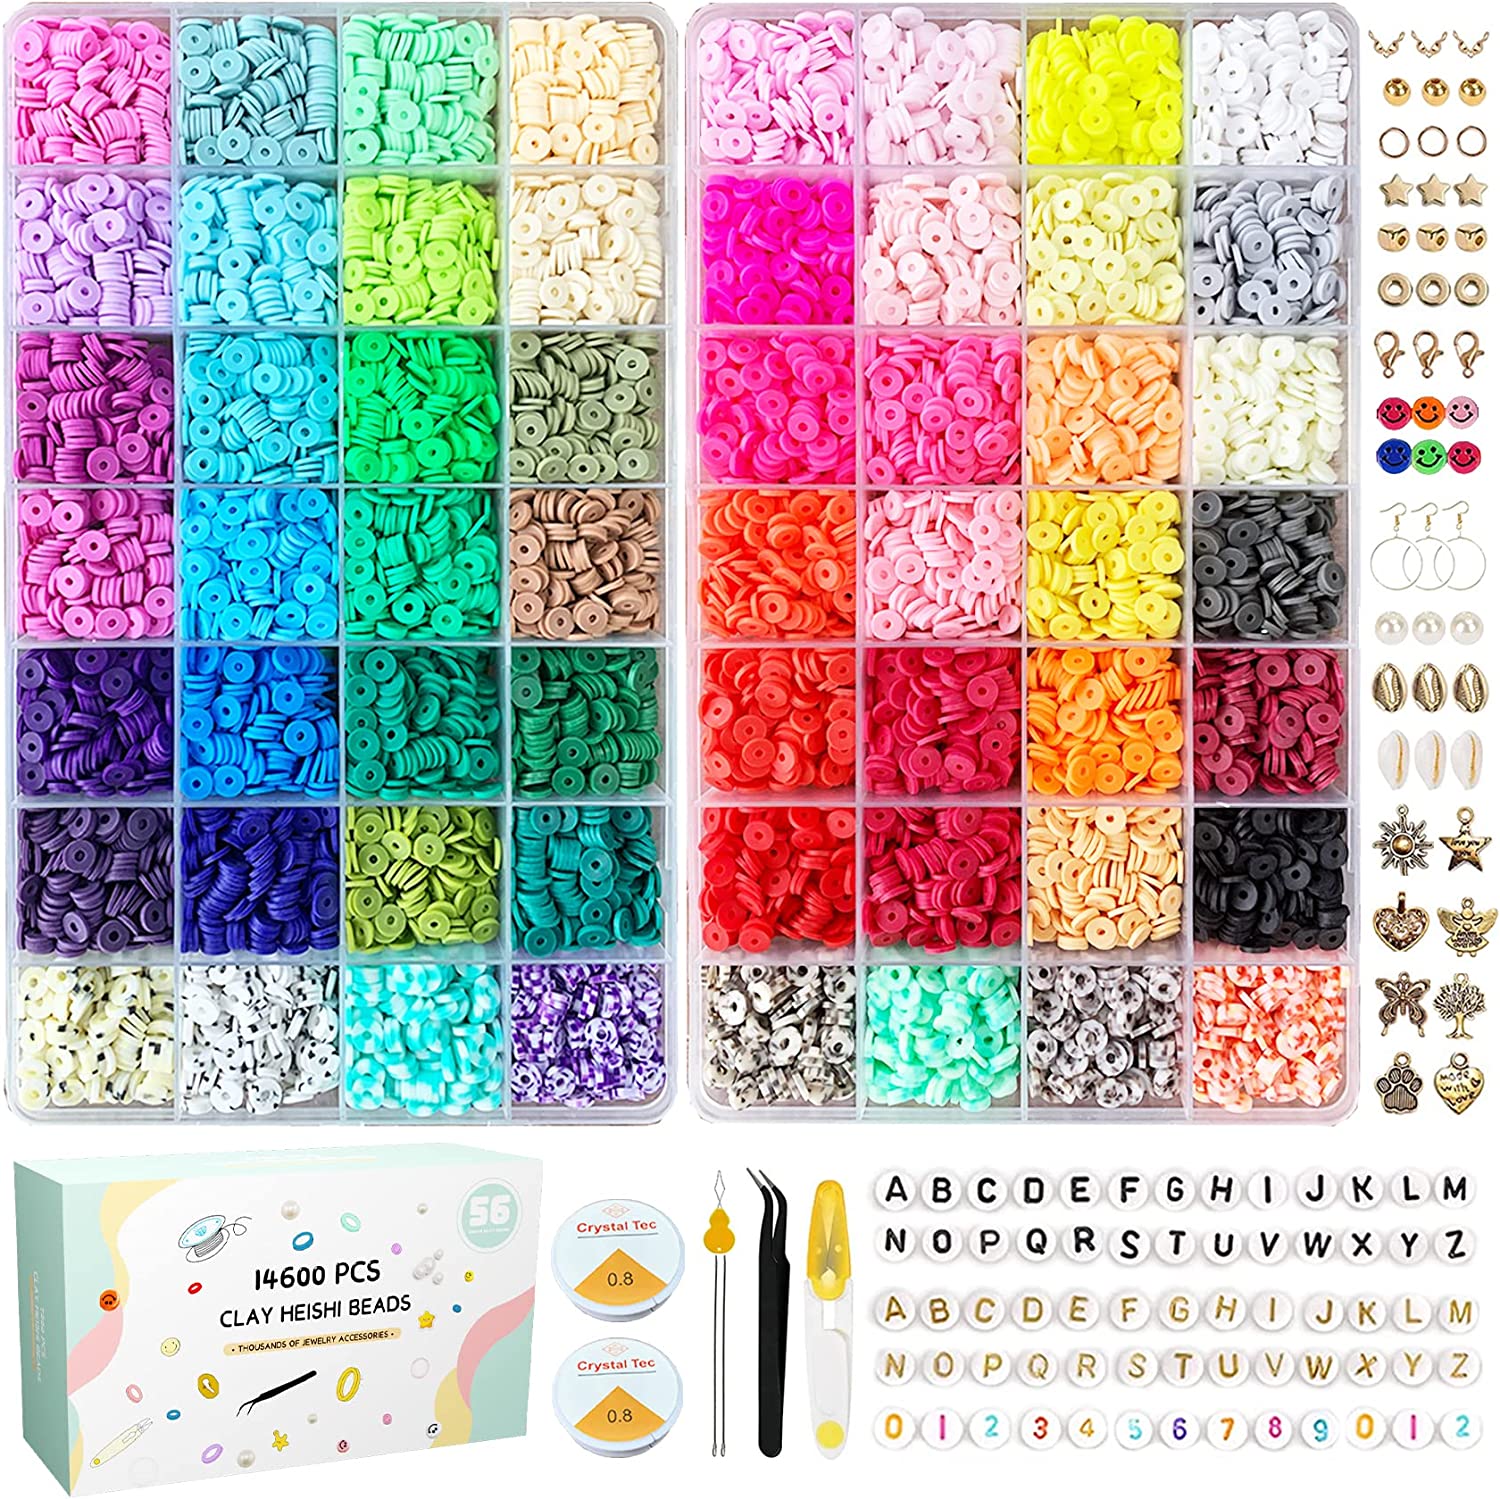 14600pcs Clay Beads for Bracelets Making Kit, 56 Colors Polymer Heishi Flat  Clay Beads Charms for Jewelry Earring Making Kit Smiley Face Letter Beads  with Necklace Strings Stuff Gift for Girls 6-12